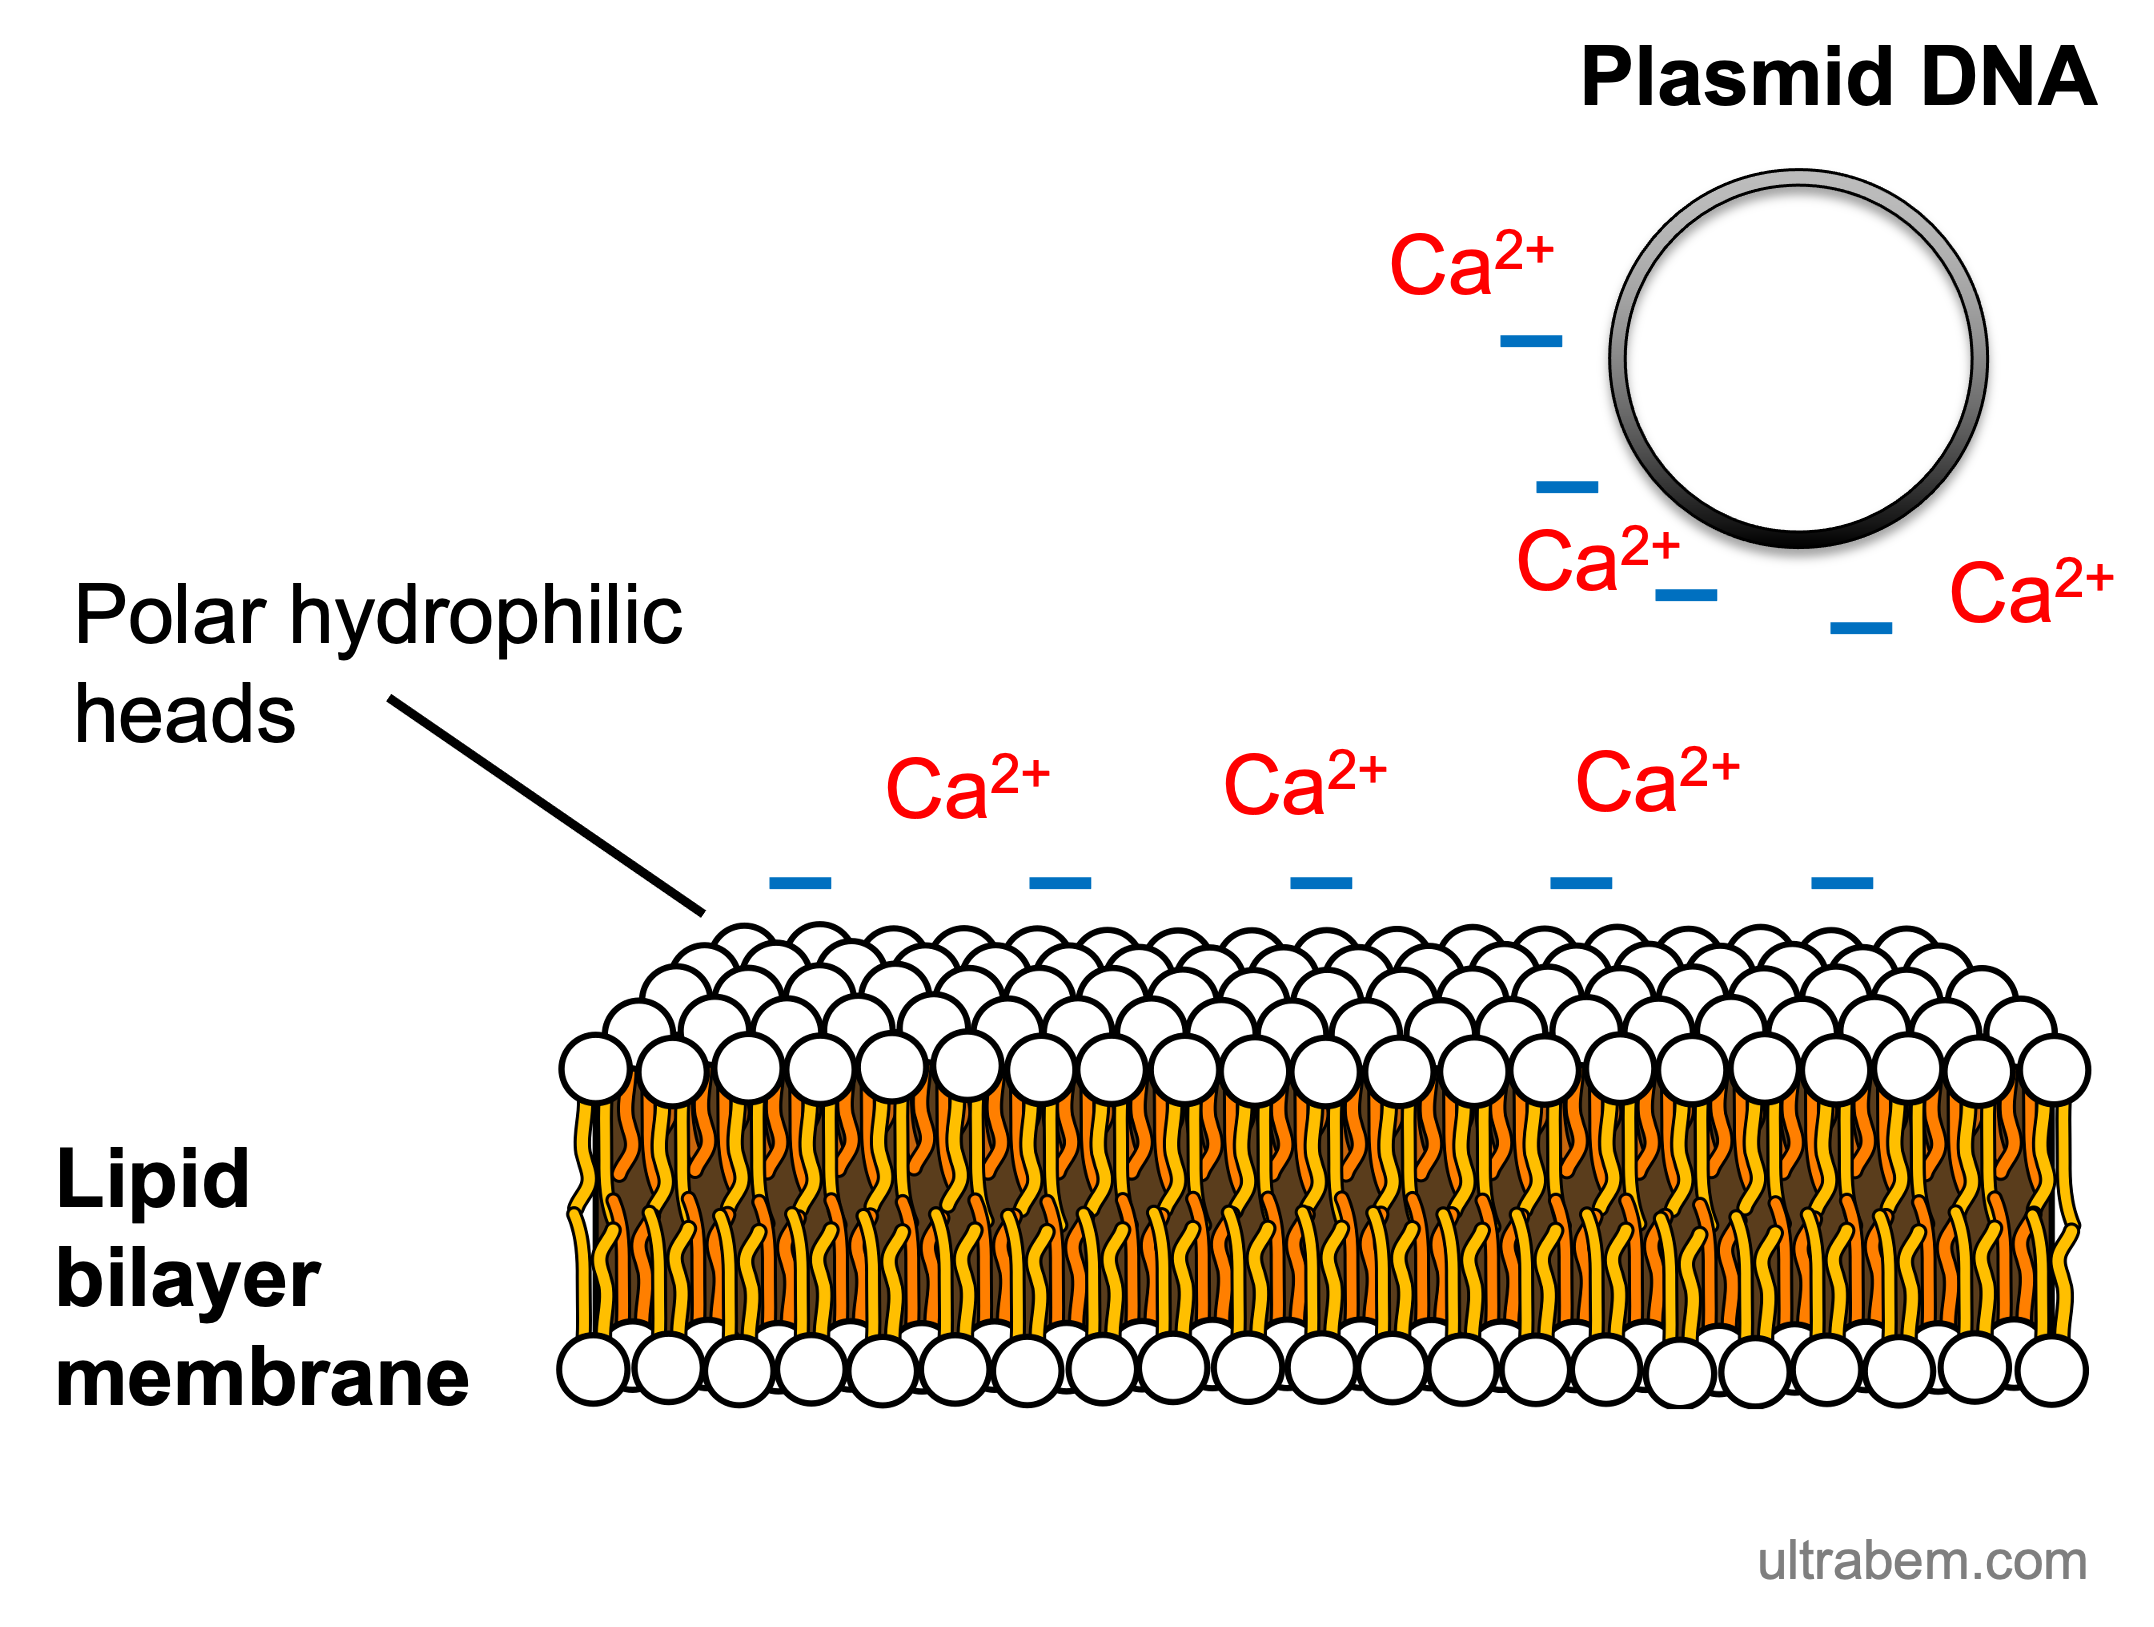 Public domain image of competent cell preparation